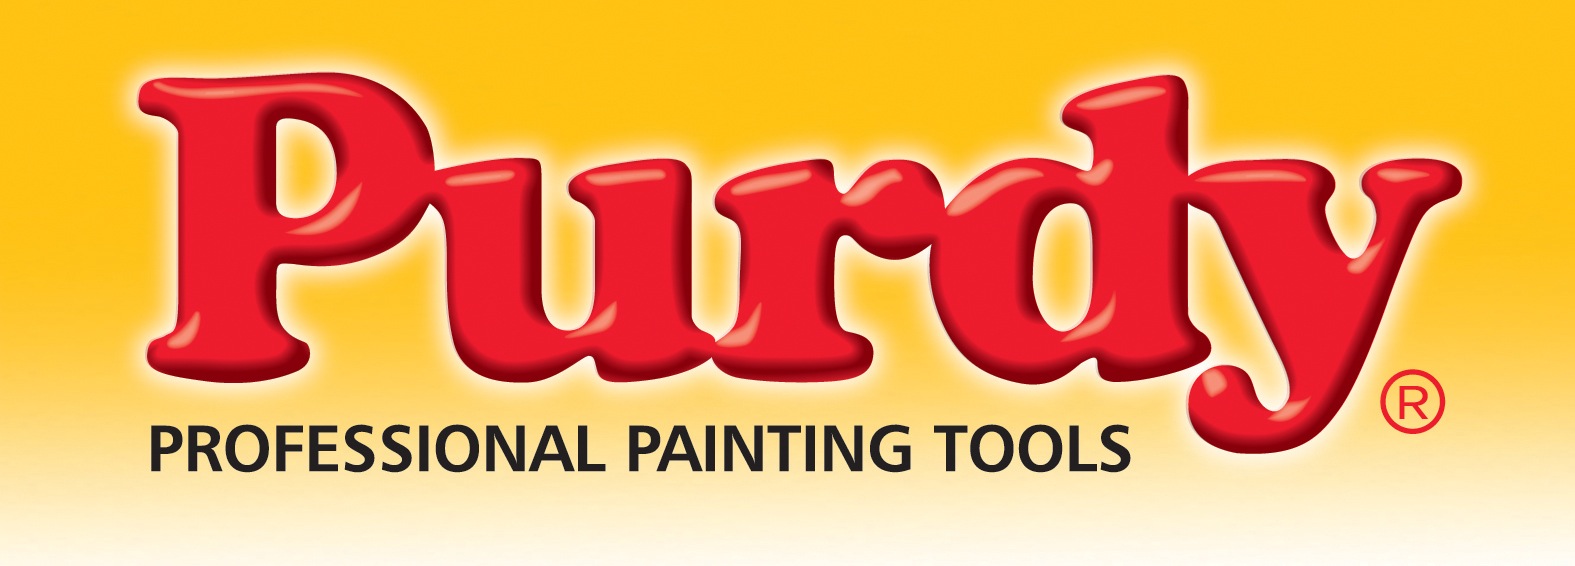 purdy-color-logo